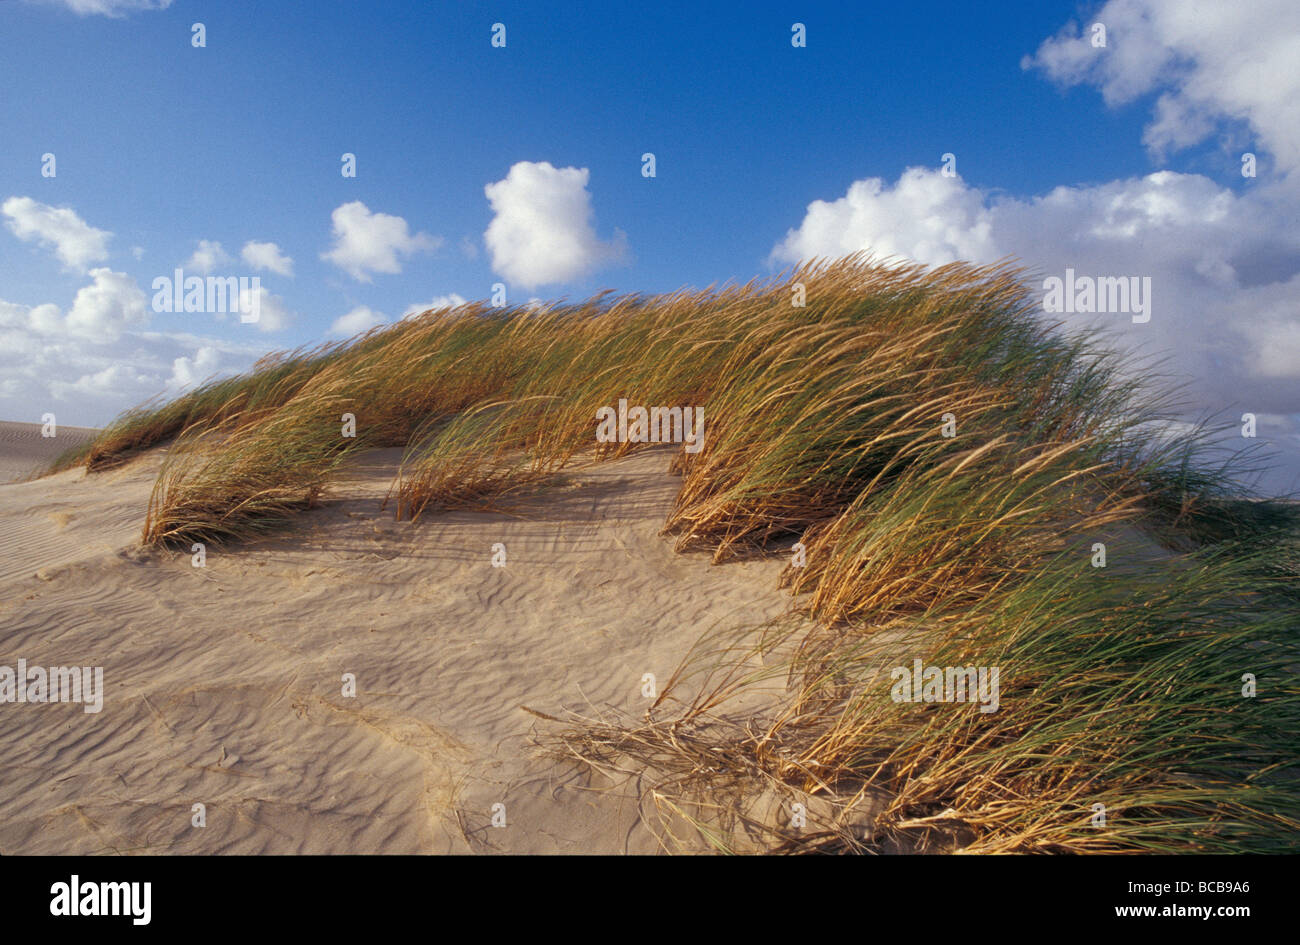 Wind blown grass tussocks precariously attached to a sand dune. Stock Photo